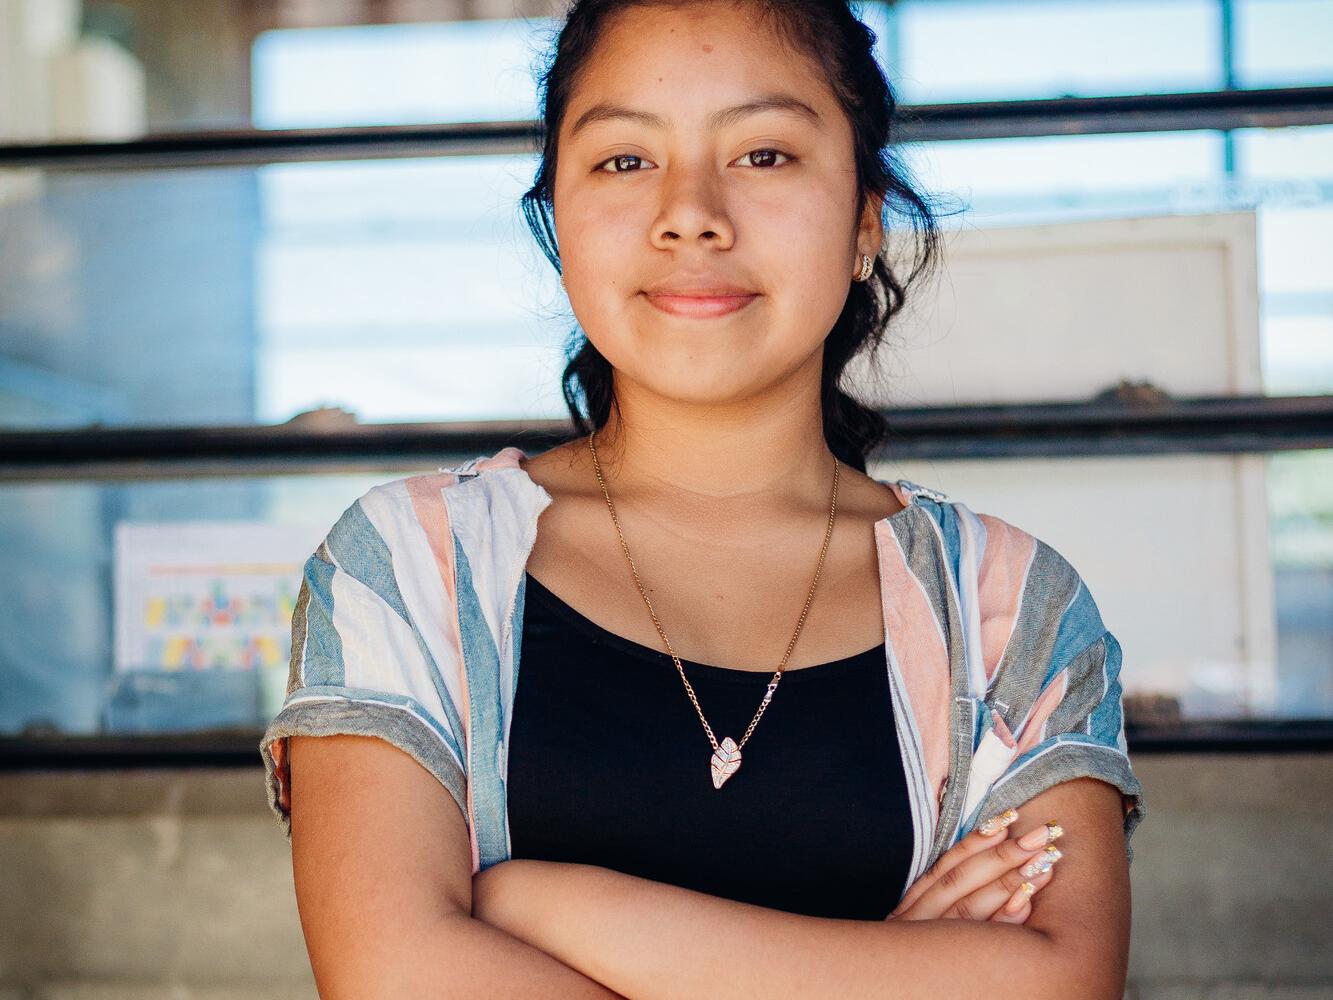 Dalila, 15, from Guatemala is now comfortable talking about periods and shares her knowledge with her friends.